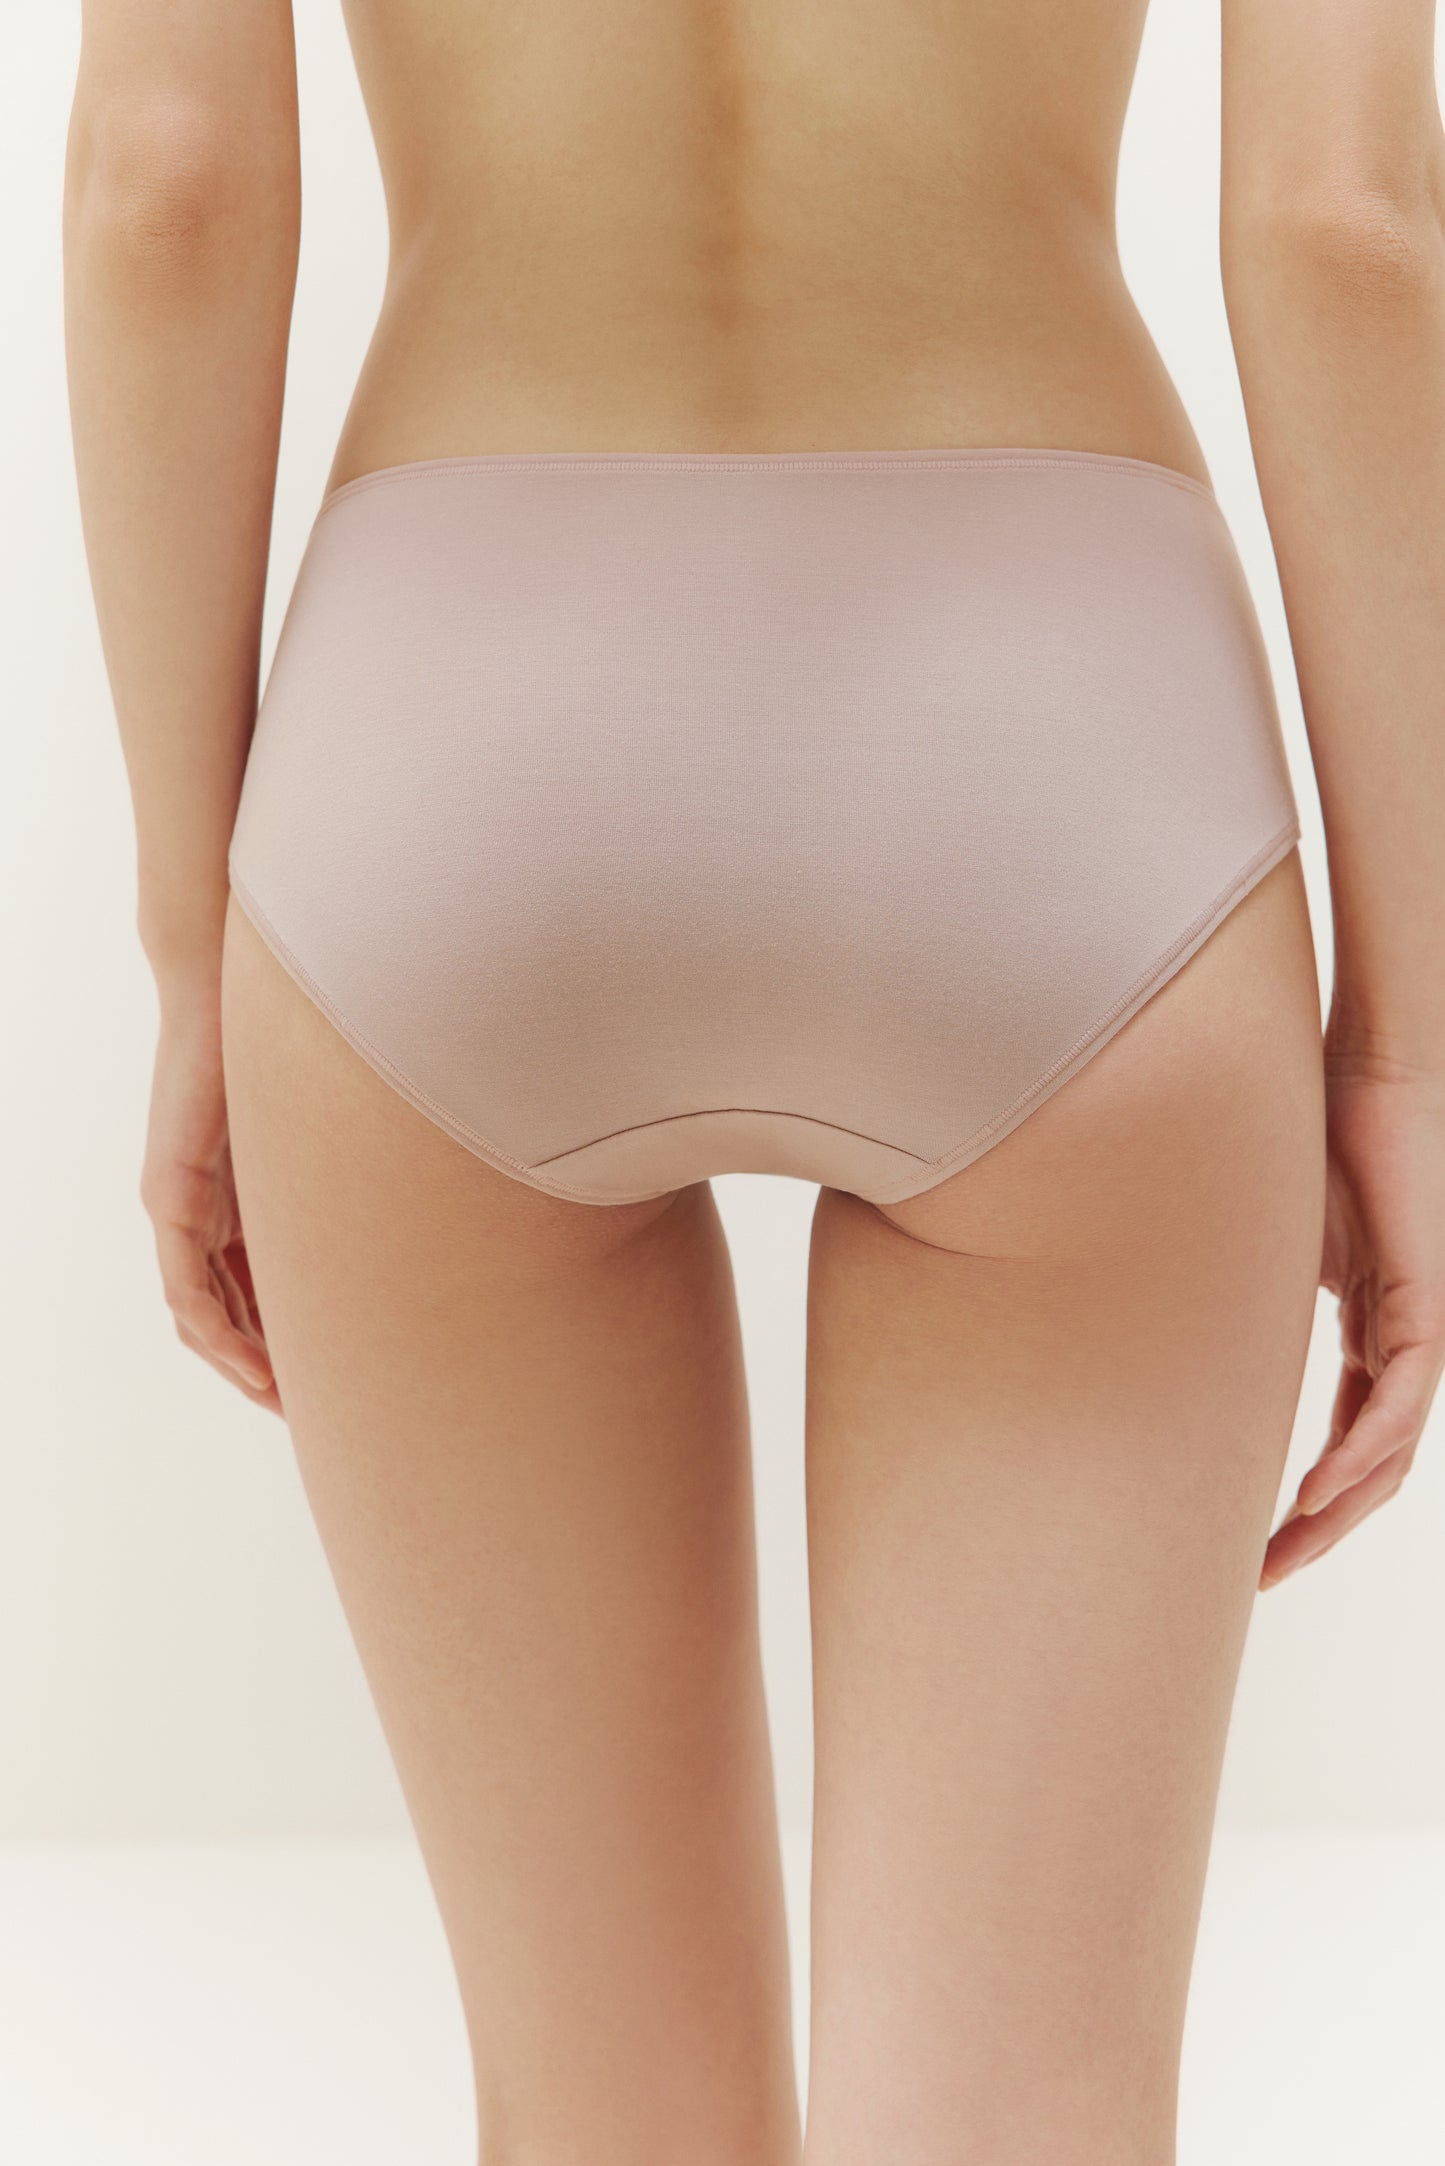 back of the light pink brief